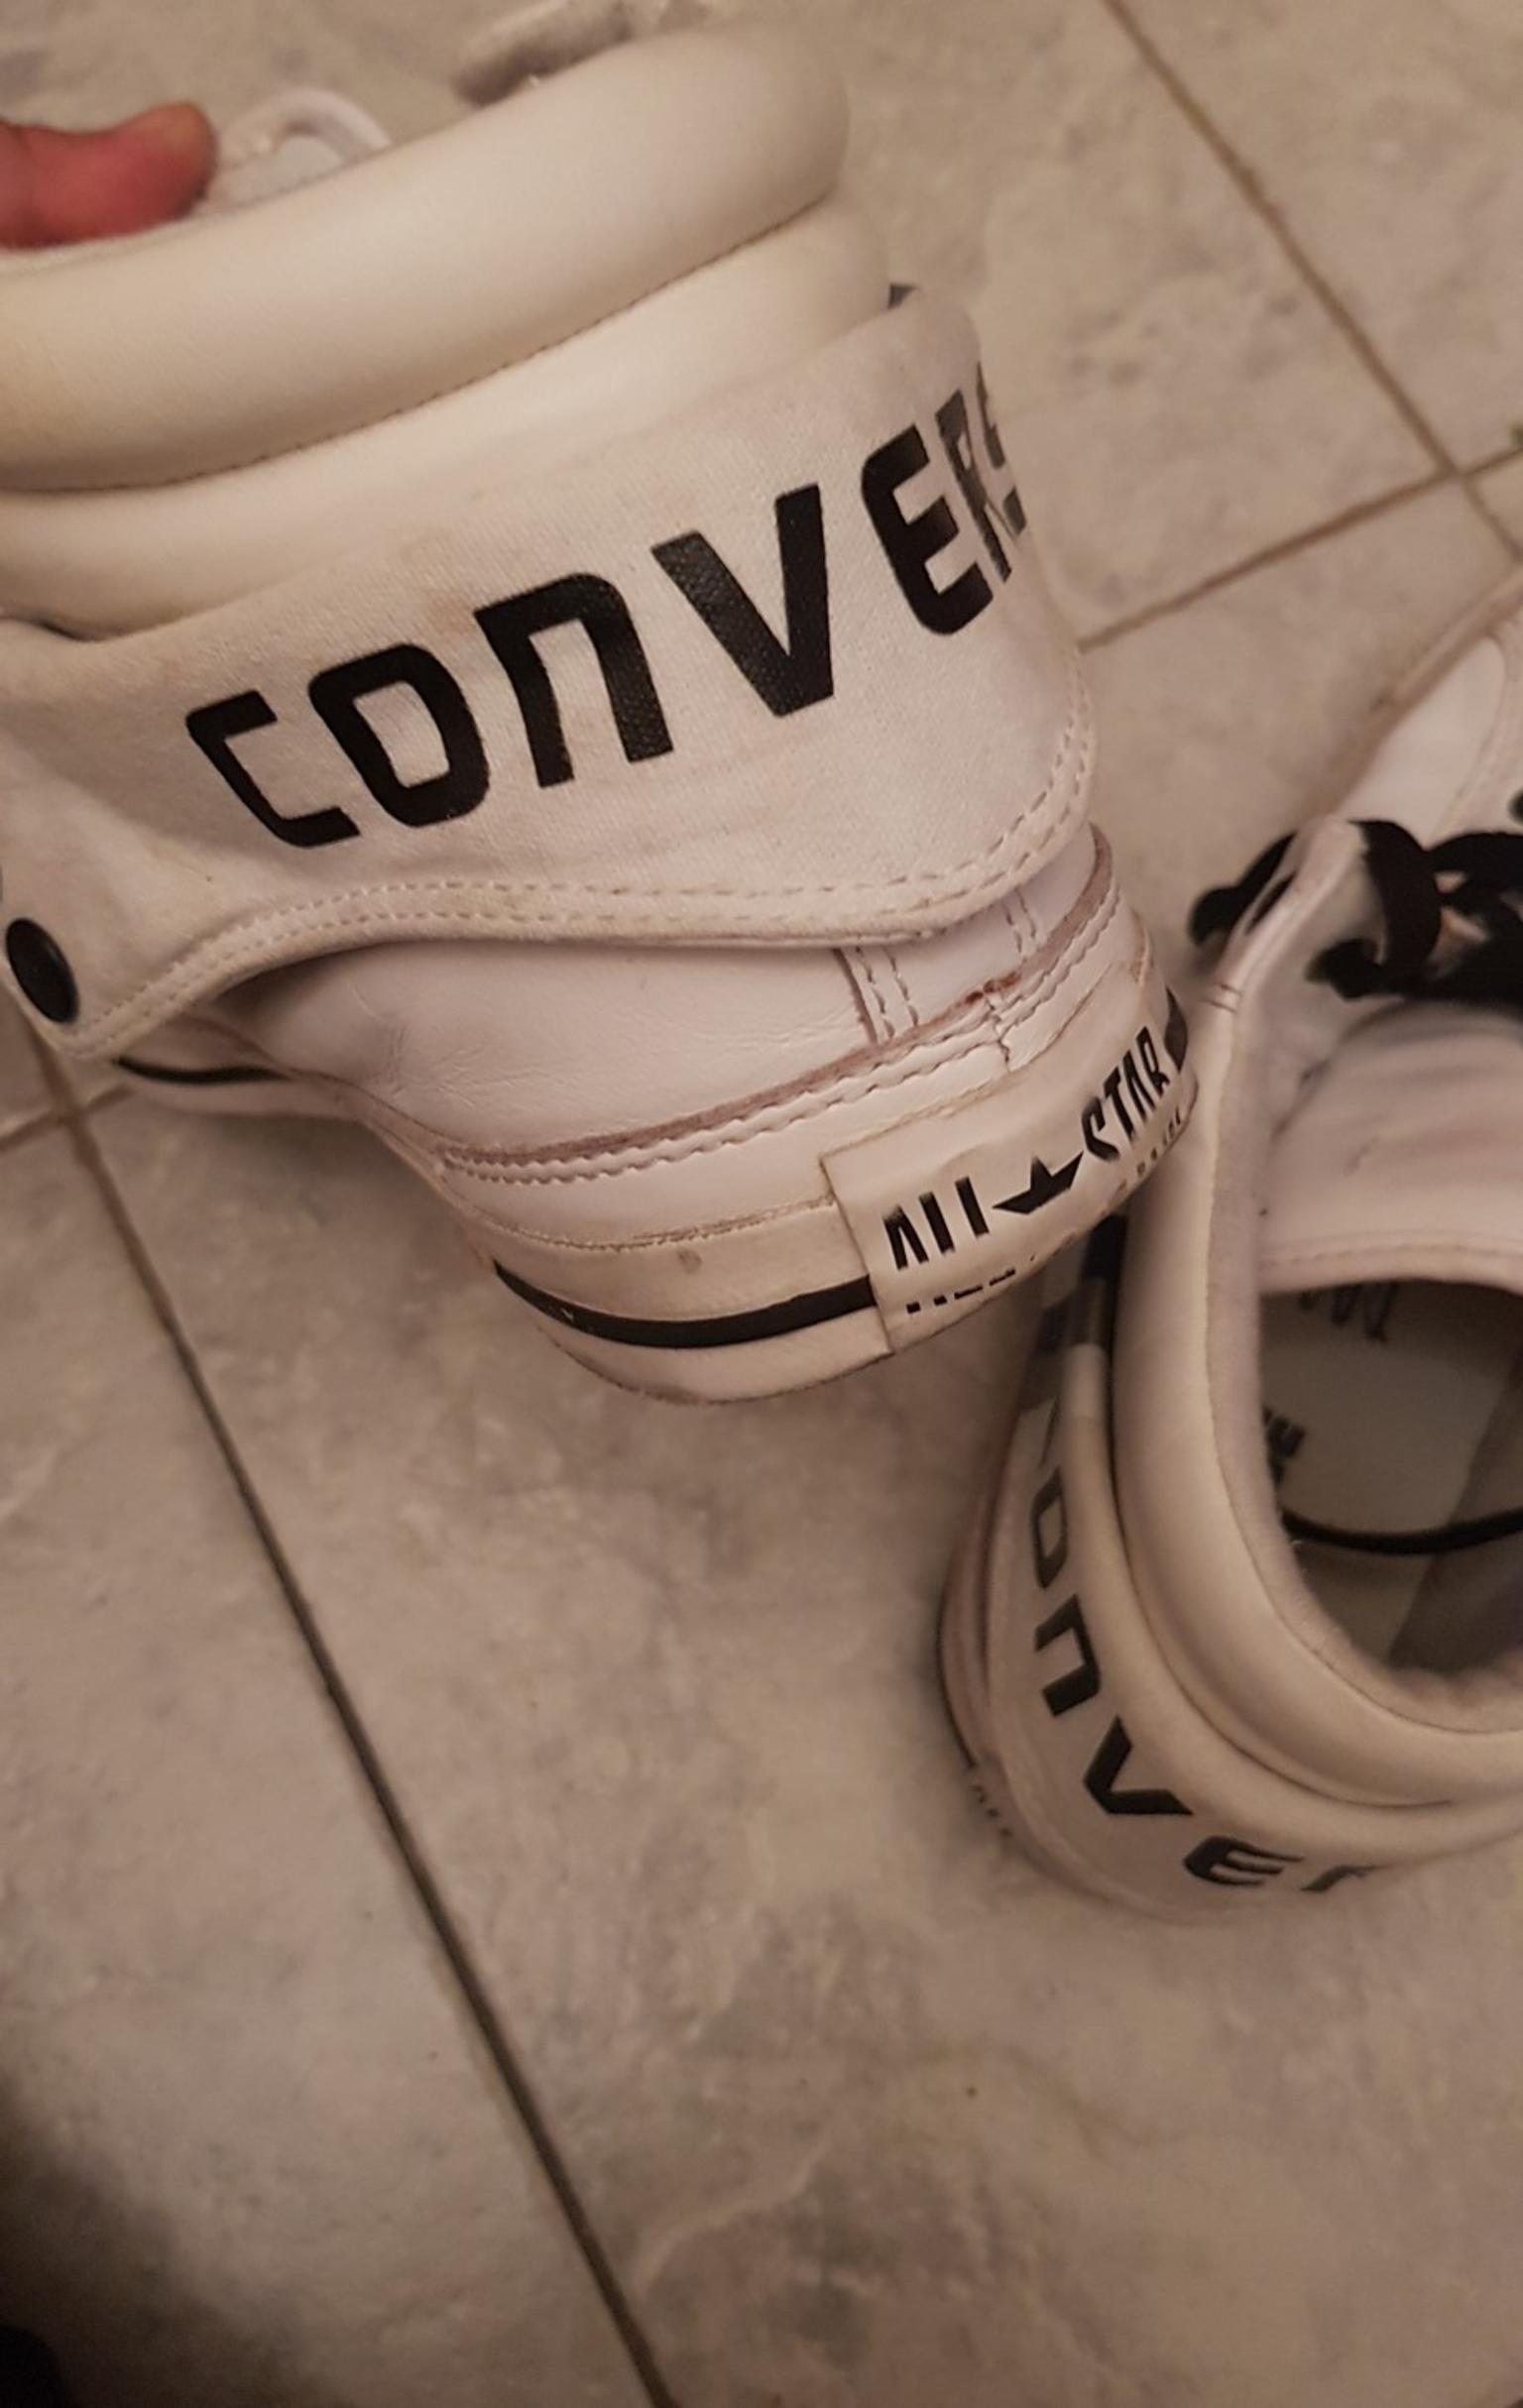 Converse reversibili bianche n. 42 in 20025 Legnano for €10.00 for sale |  Shpock